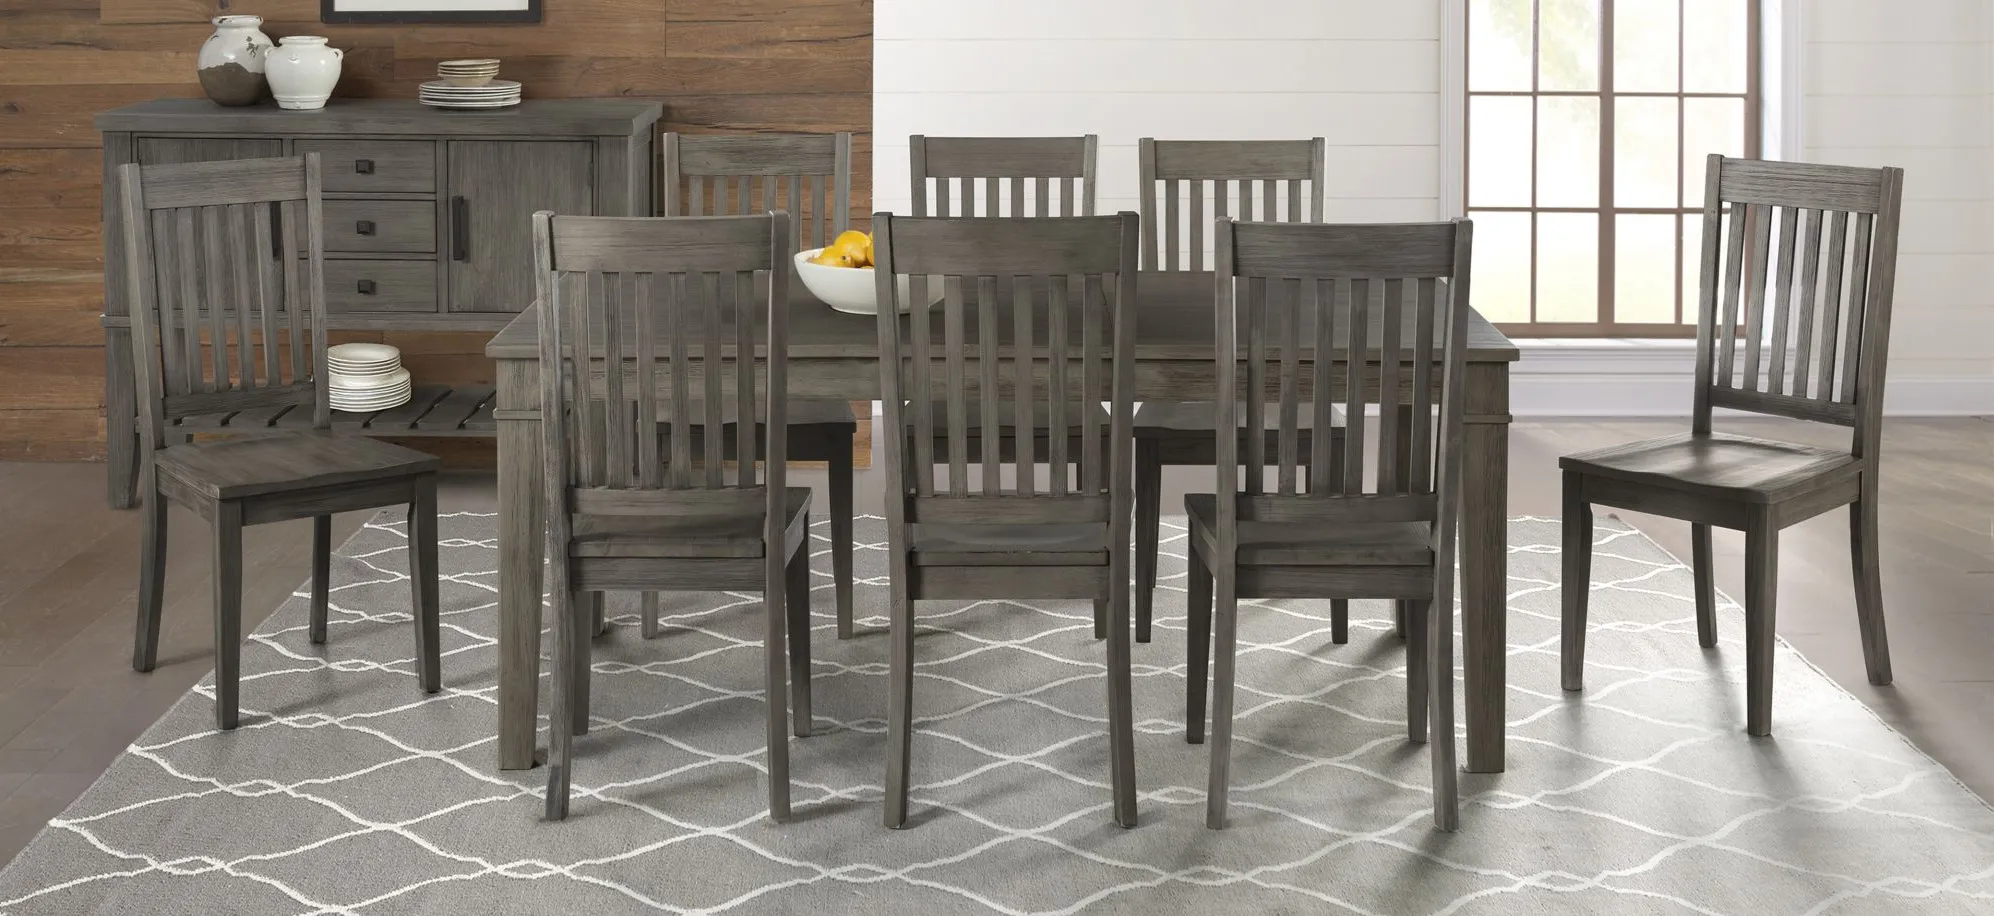 Huron 9-pc. Rectangular Slatback Dining Set in Distressed Gray by A-America